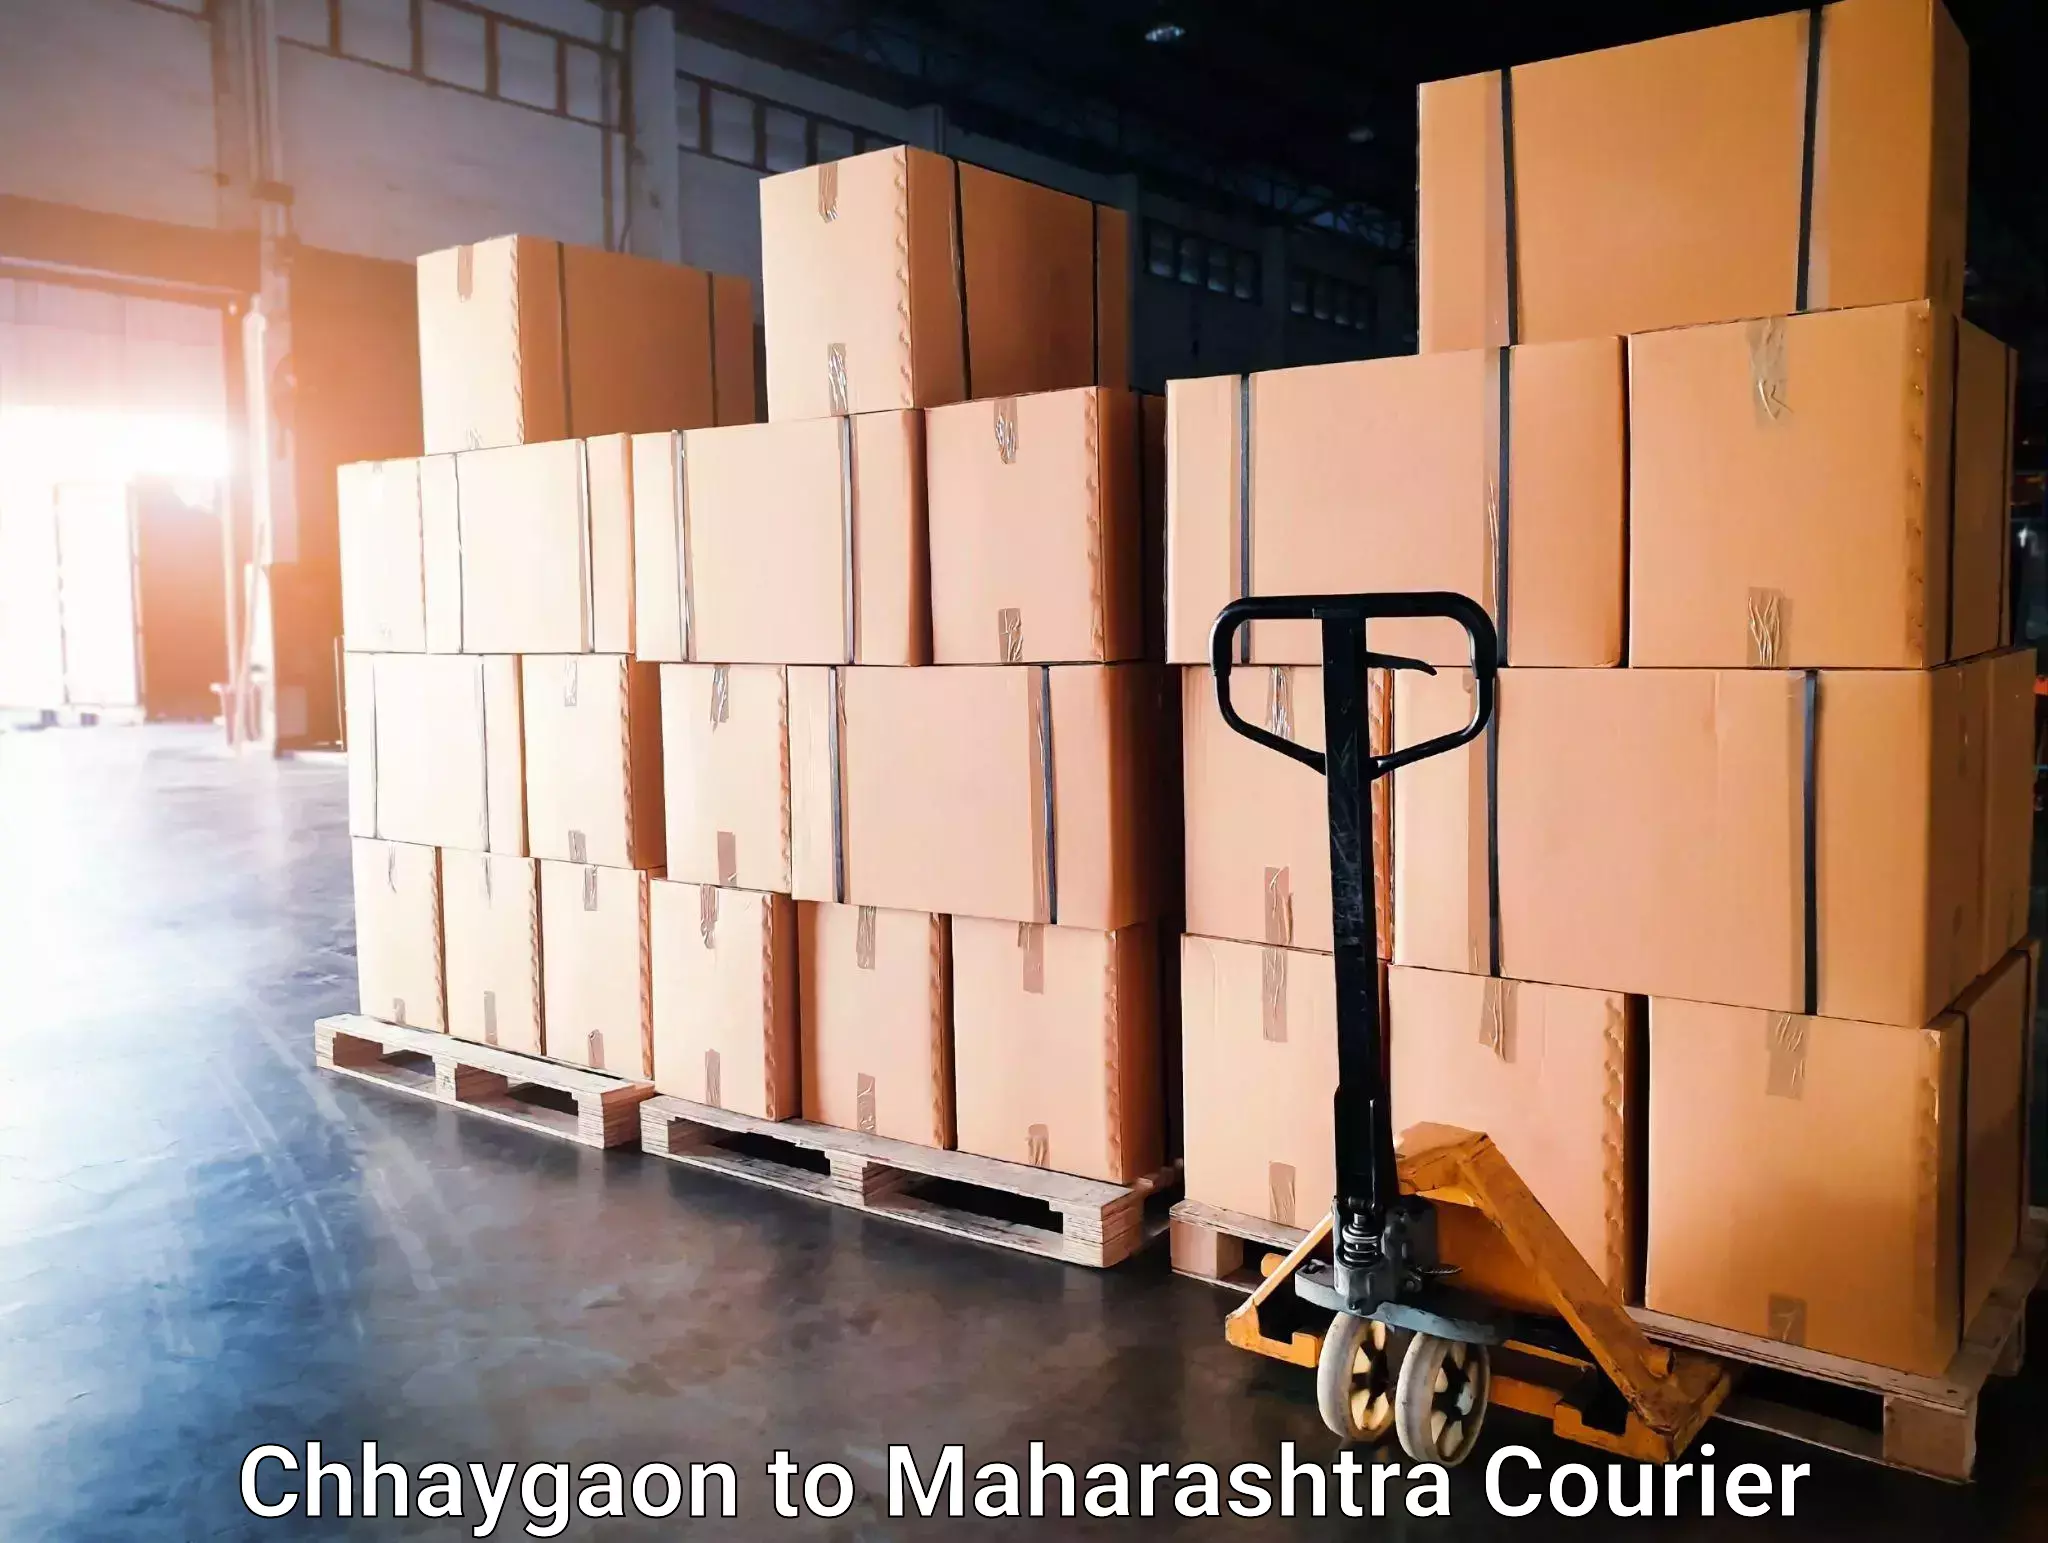 Express delivery network Chhaygaon to Saphale